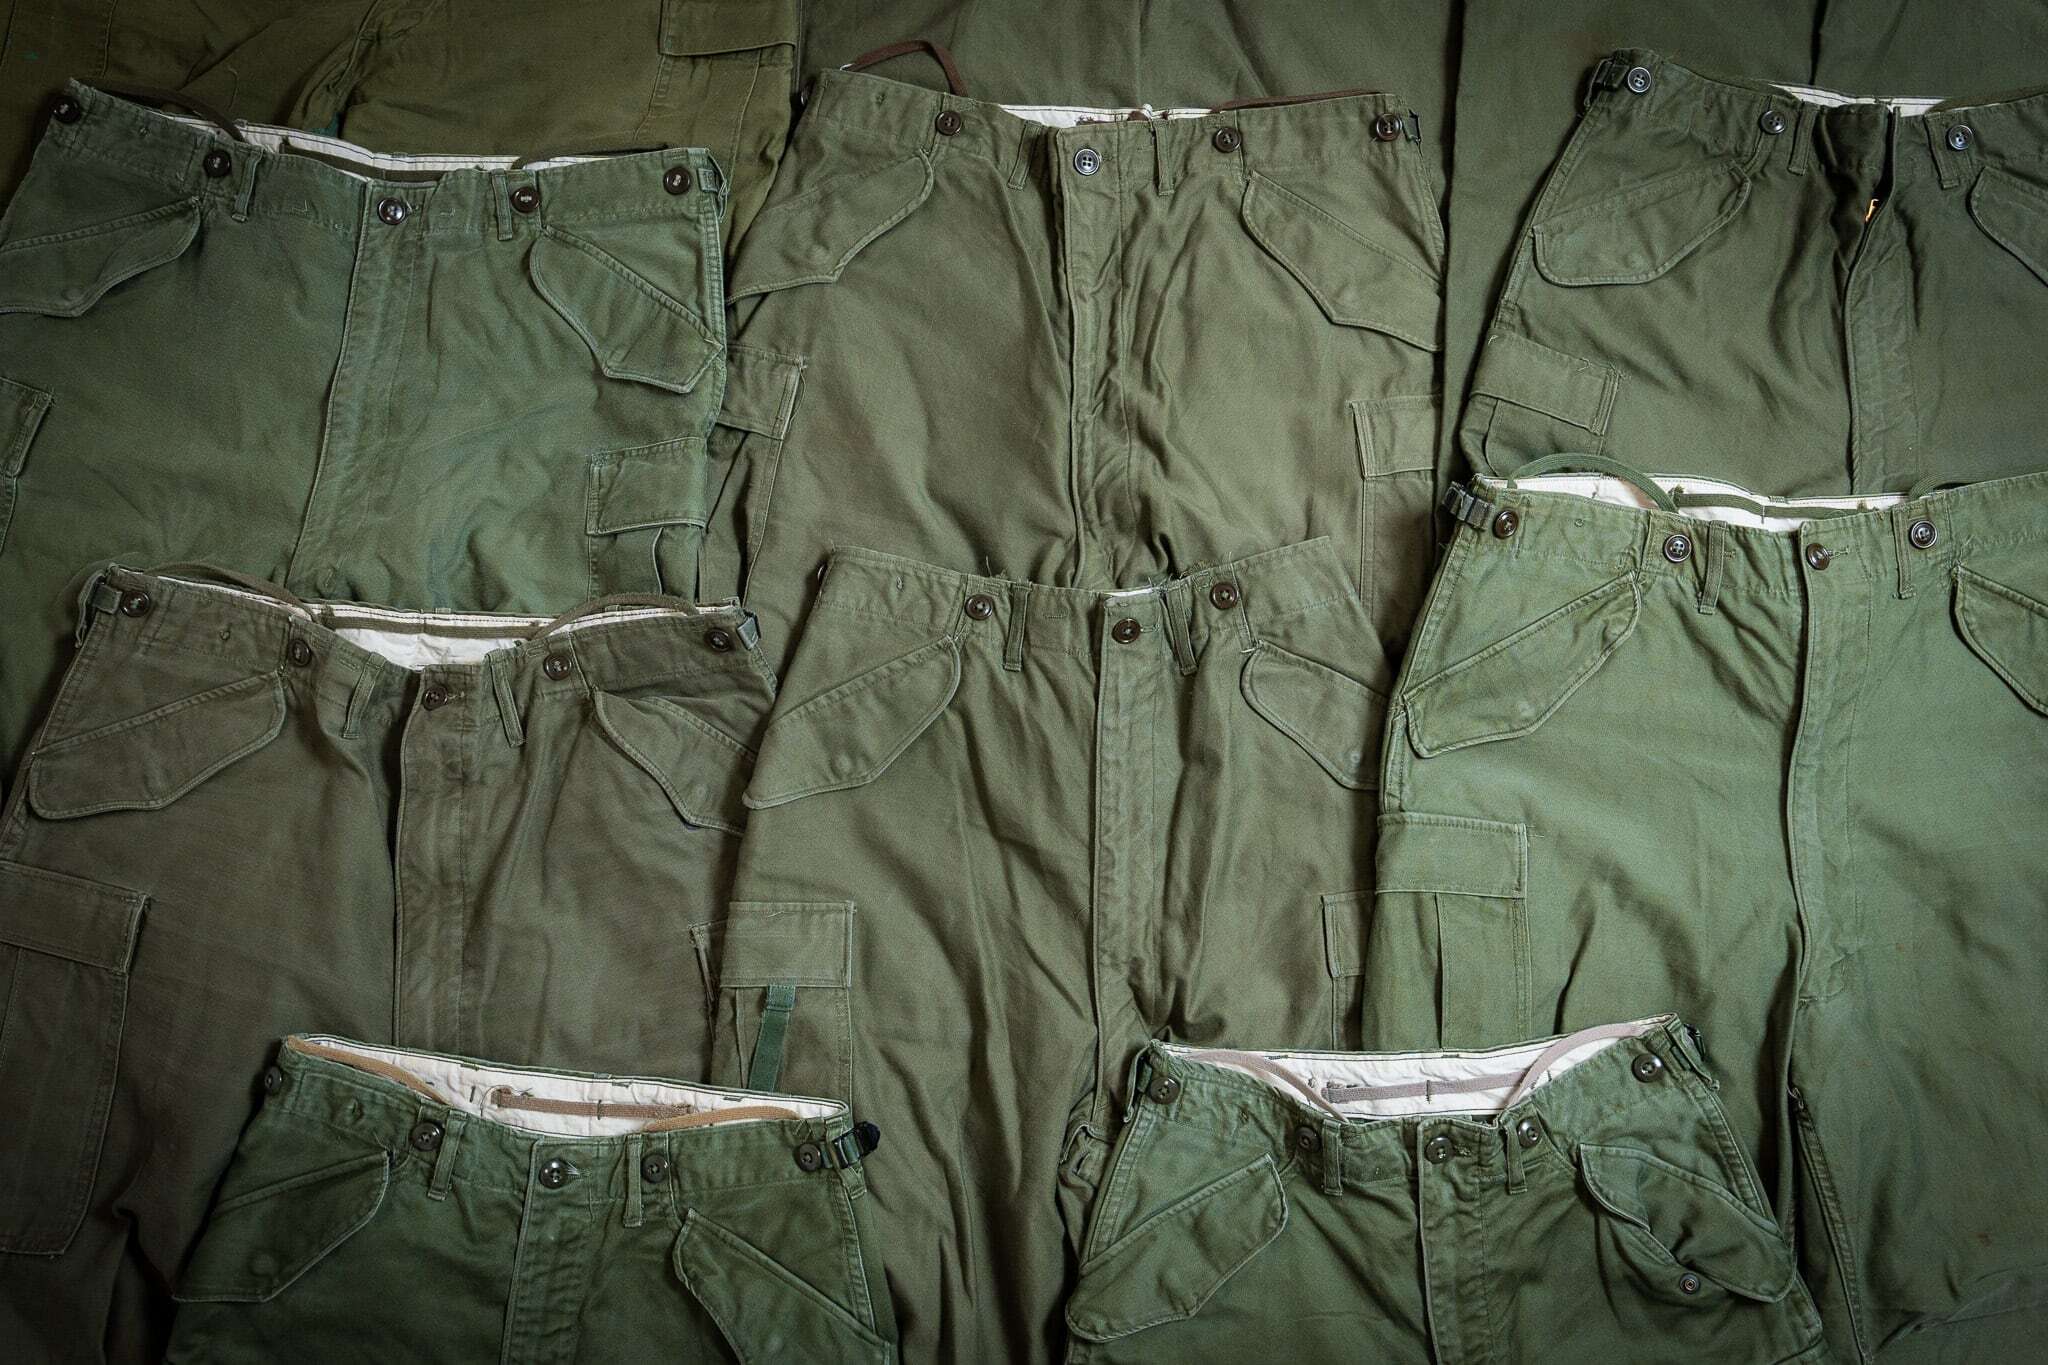 S RU.S.Army M Field Trousers "Used" アメリカ軍 M カーゴ